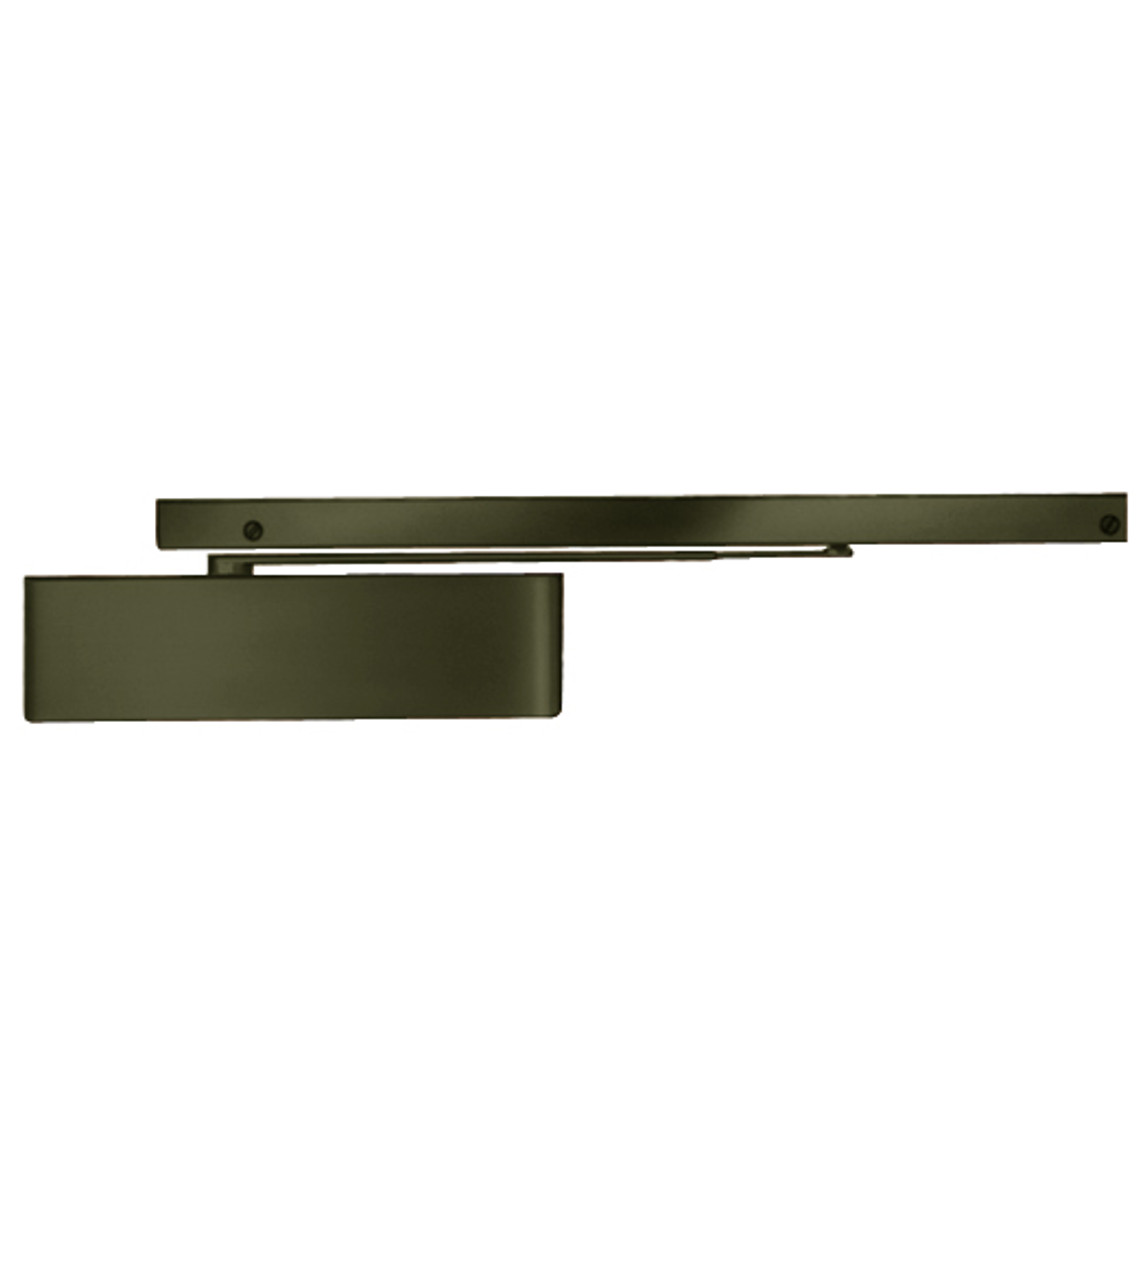 4040SE-LONG-24V-AC/DC-US10B LCN Door Closer with Long Arm in Oil Rubbed Bronze Finish